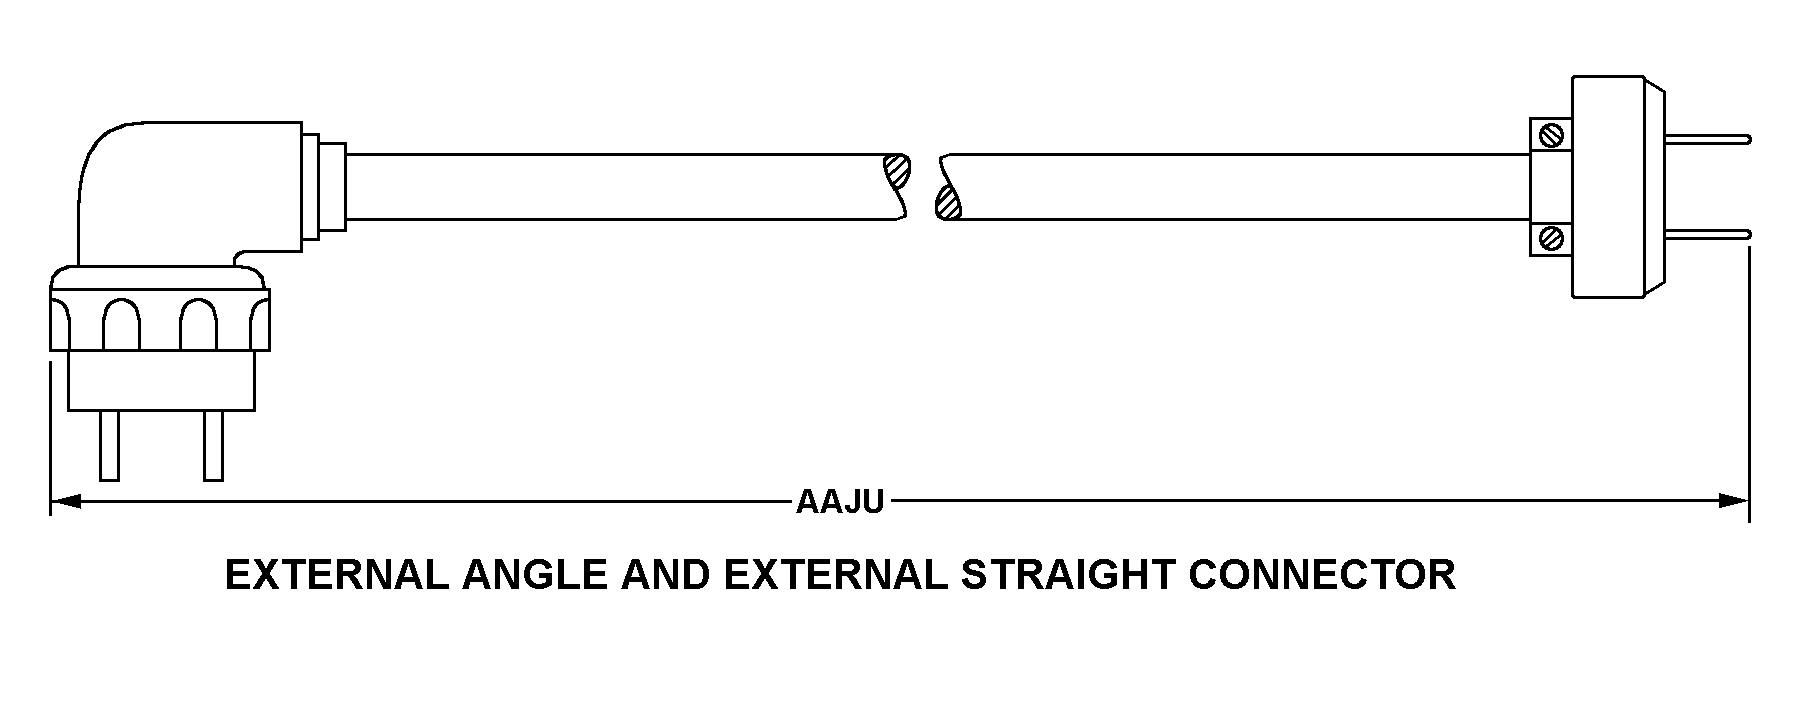 EXTERNAL ANGLE AND EXTERNAL STRAIGHT CONNECTOR style nsn 5995-01-591-8888